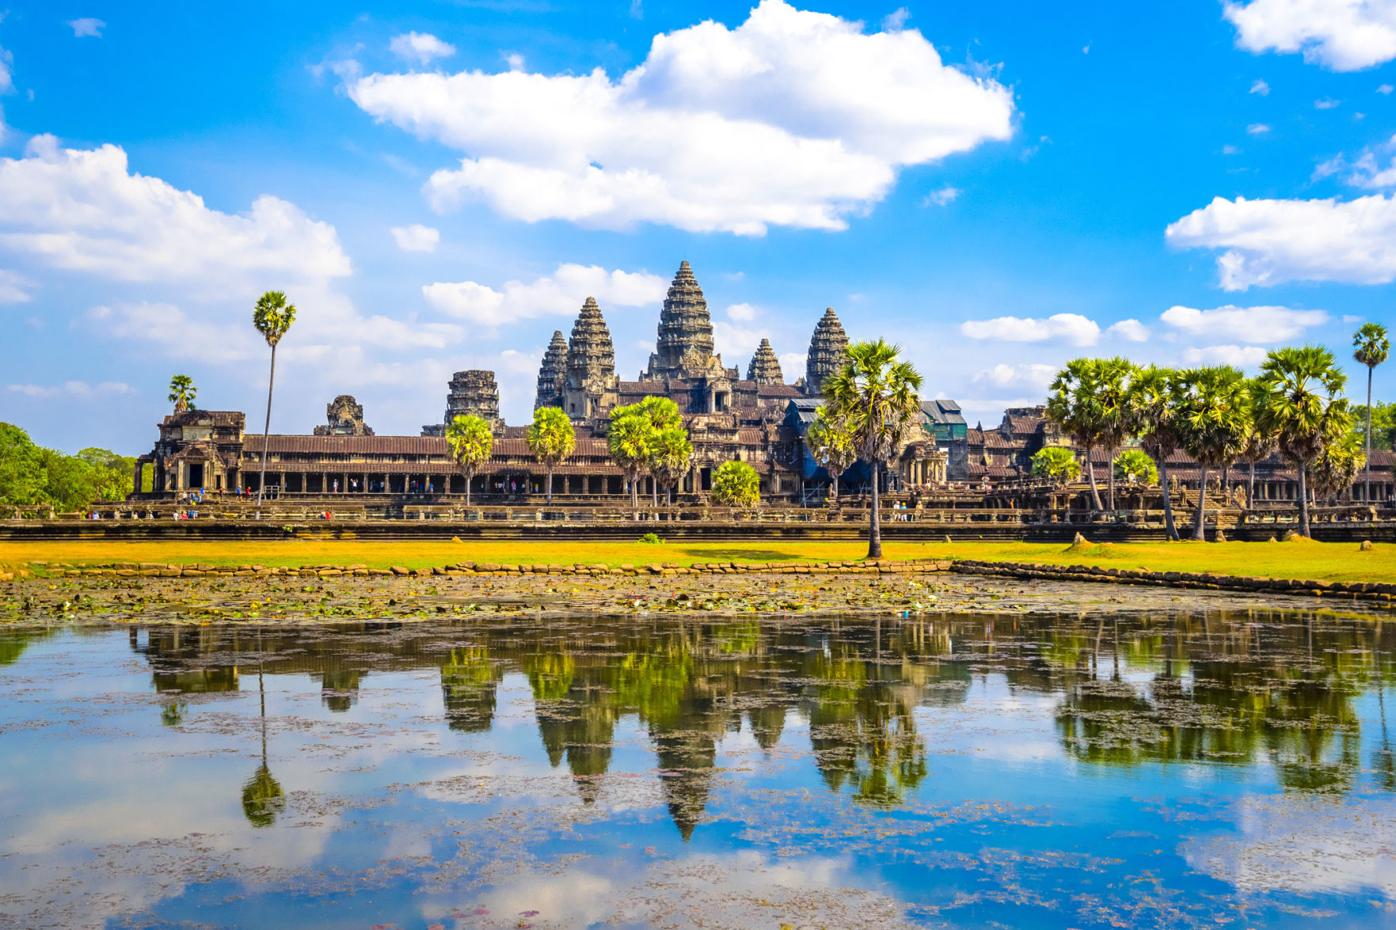 The temples at Angkor Wat: Cambodia's jewel | Lifestyles | thesuburban.com